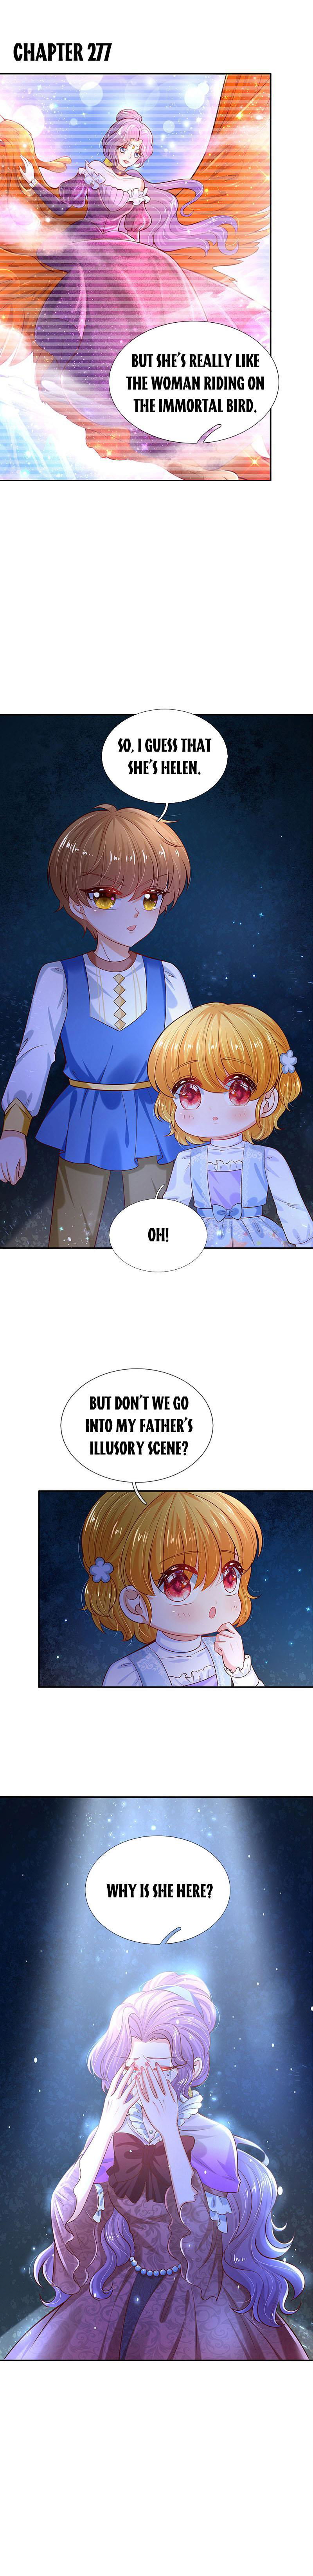 I Became The Emperor's Daughter One Day Chapter 277 page 1